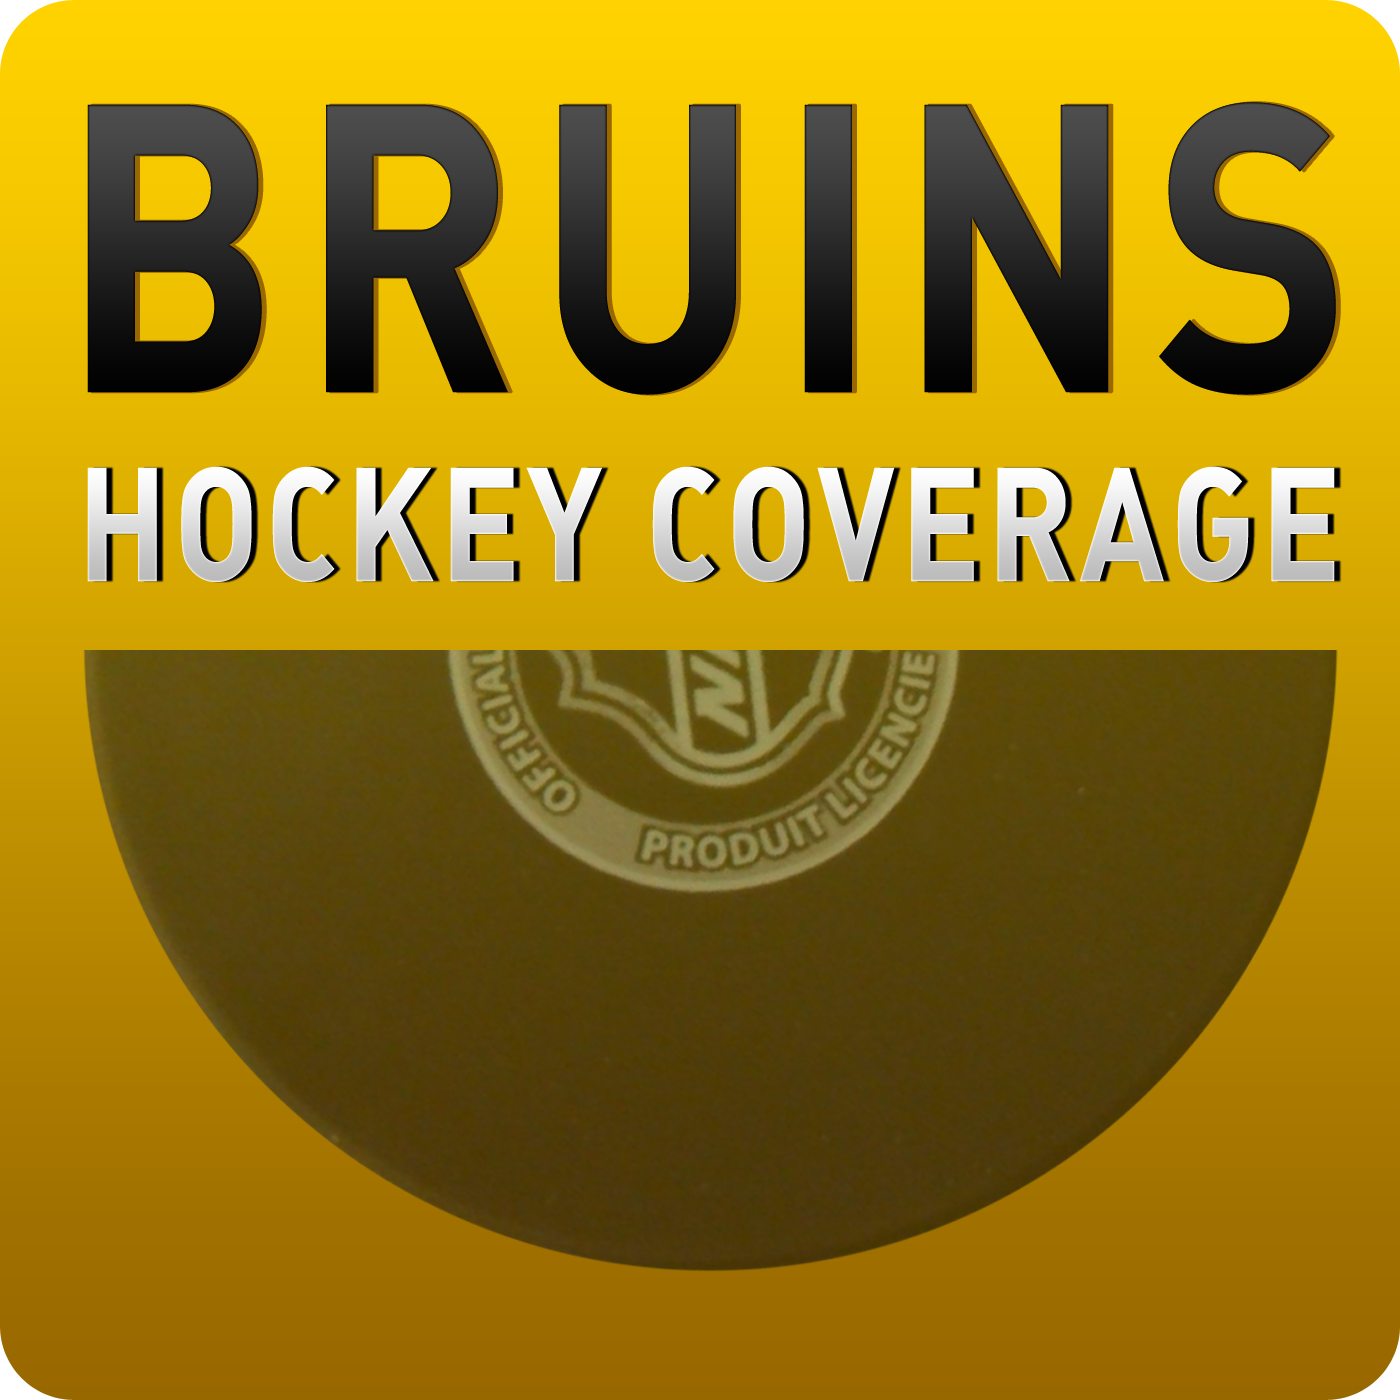 OMF- Boston Bruins Goalie Jeremy Swayman joined OMF for a Bruins discussion